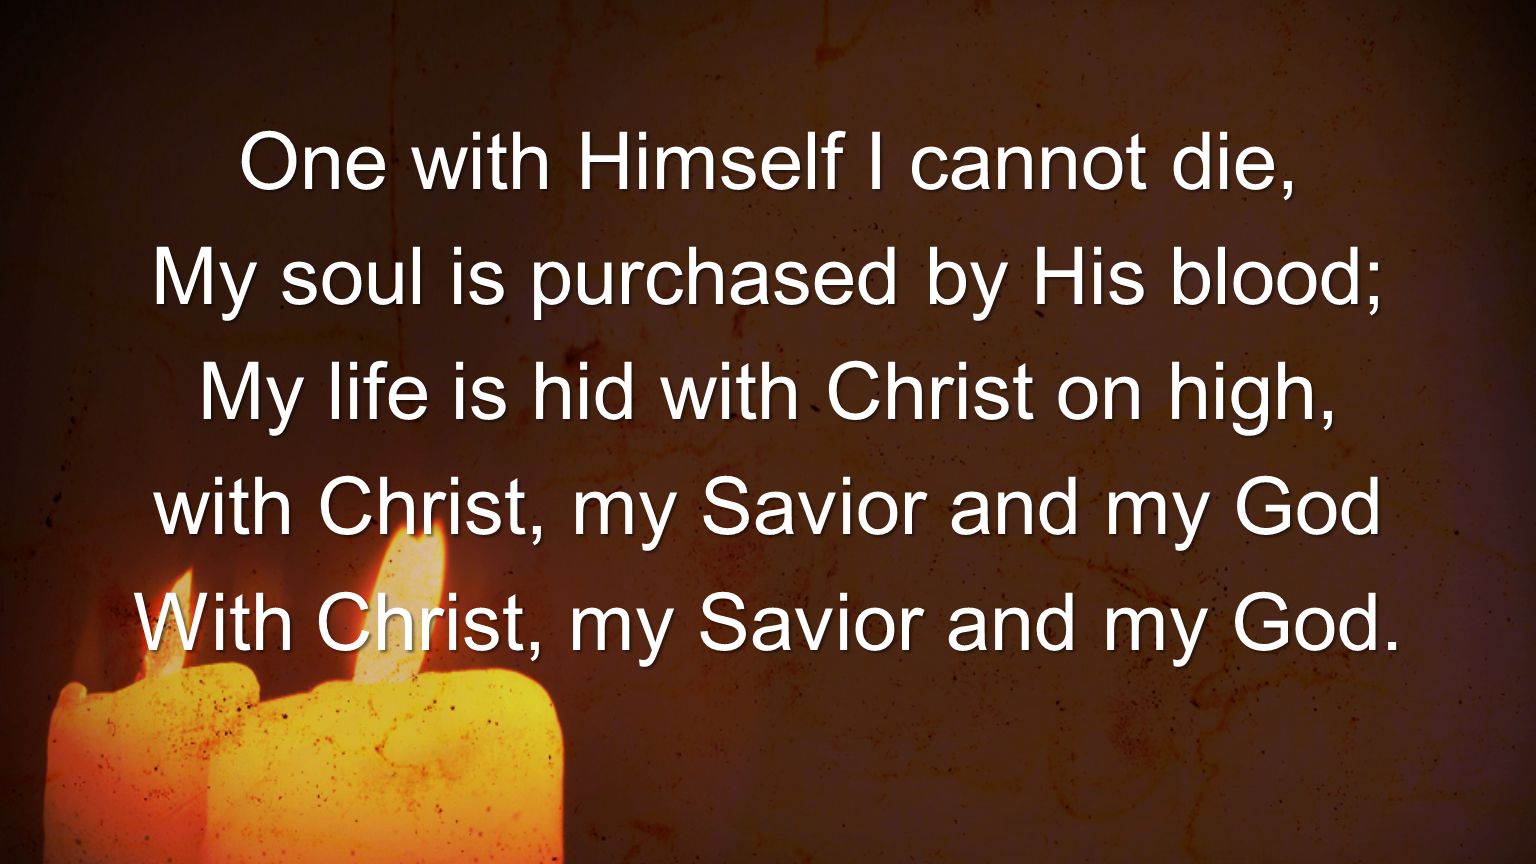 One with Himself I cannot die, My soul is purchased by His blood;